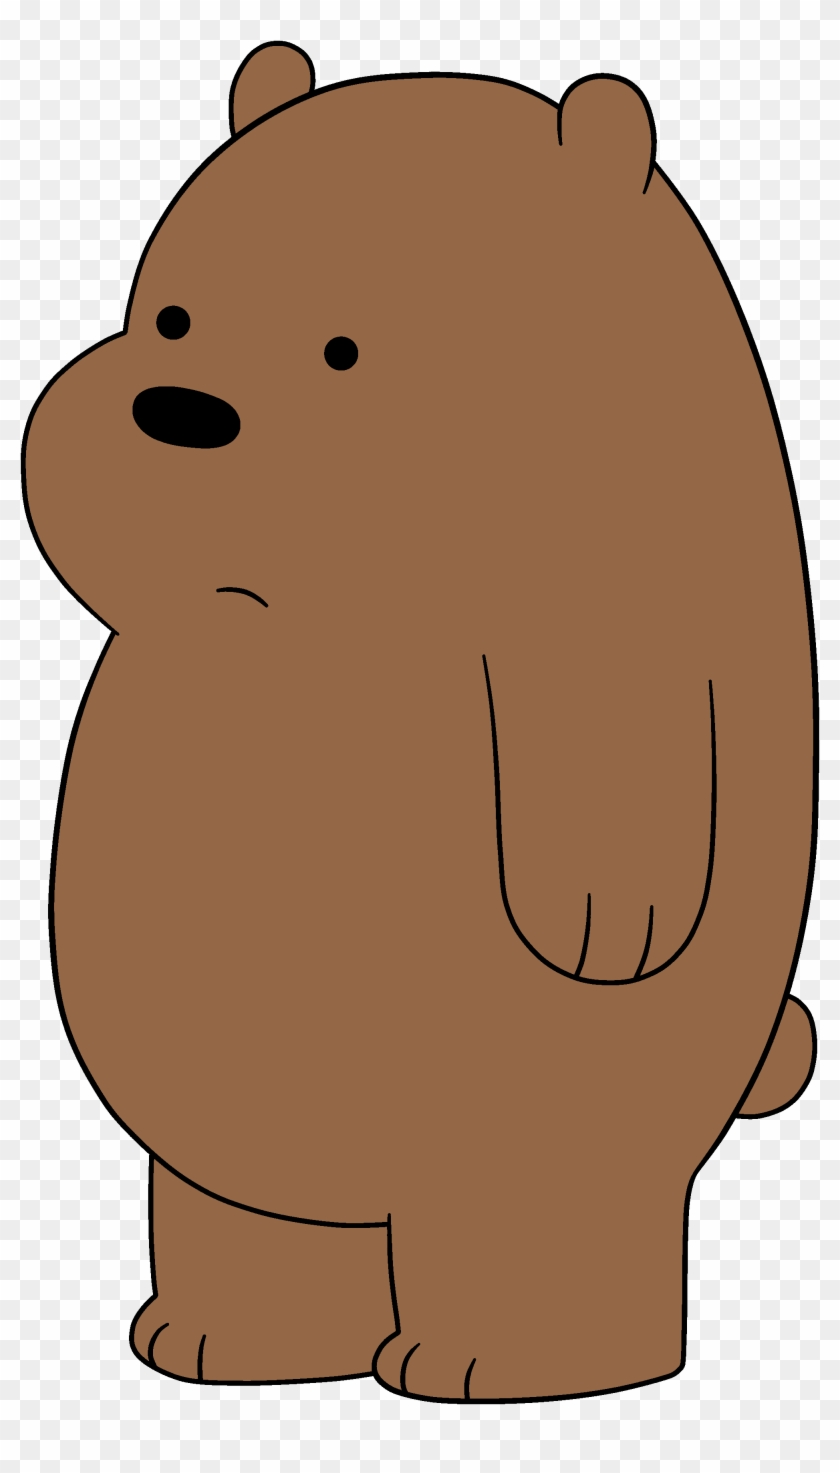 Baby Grizzly - We Bare Bears Grizzly Baby #181122